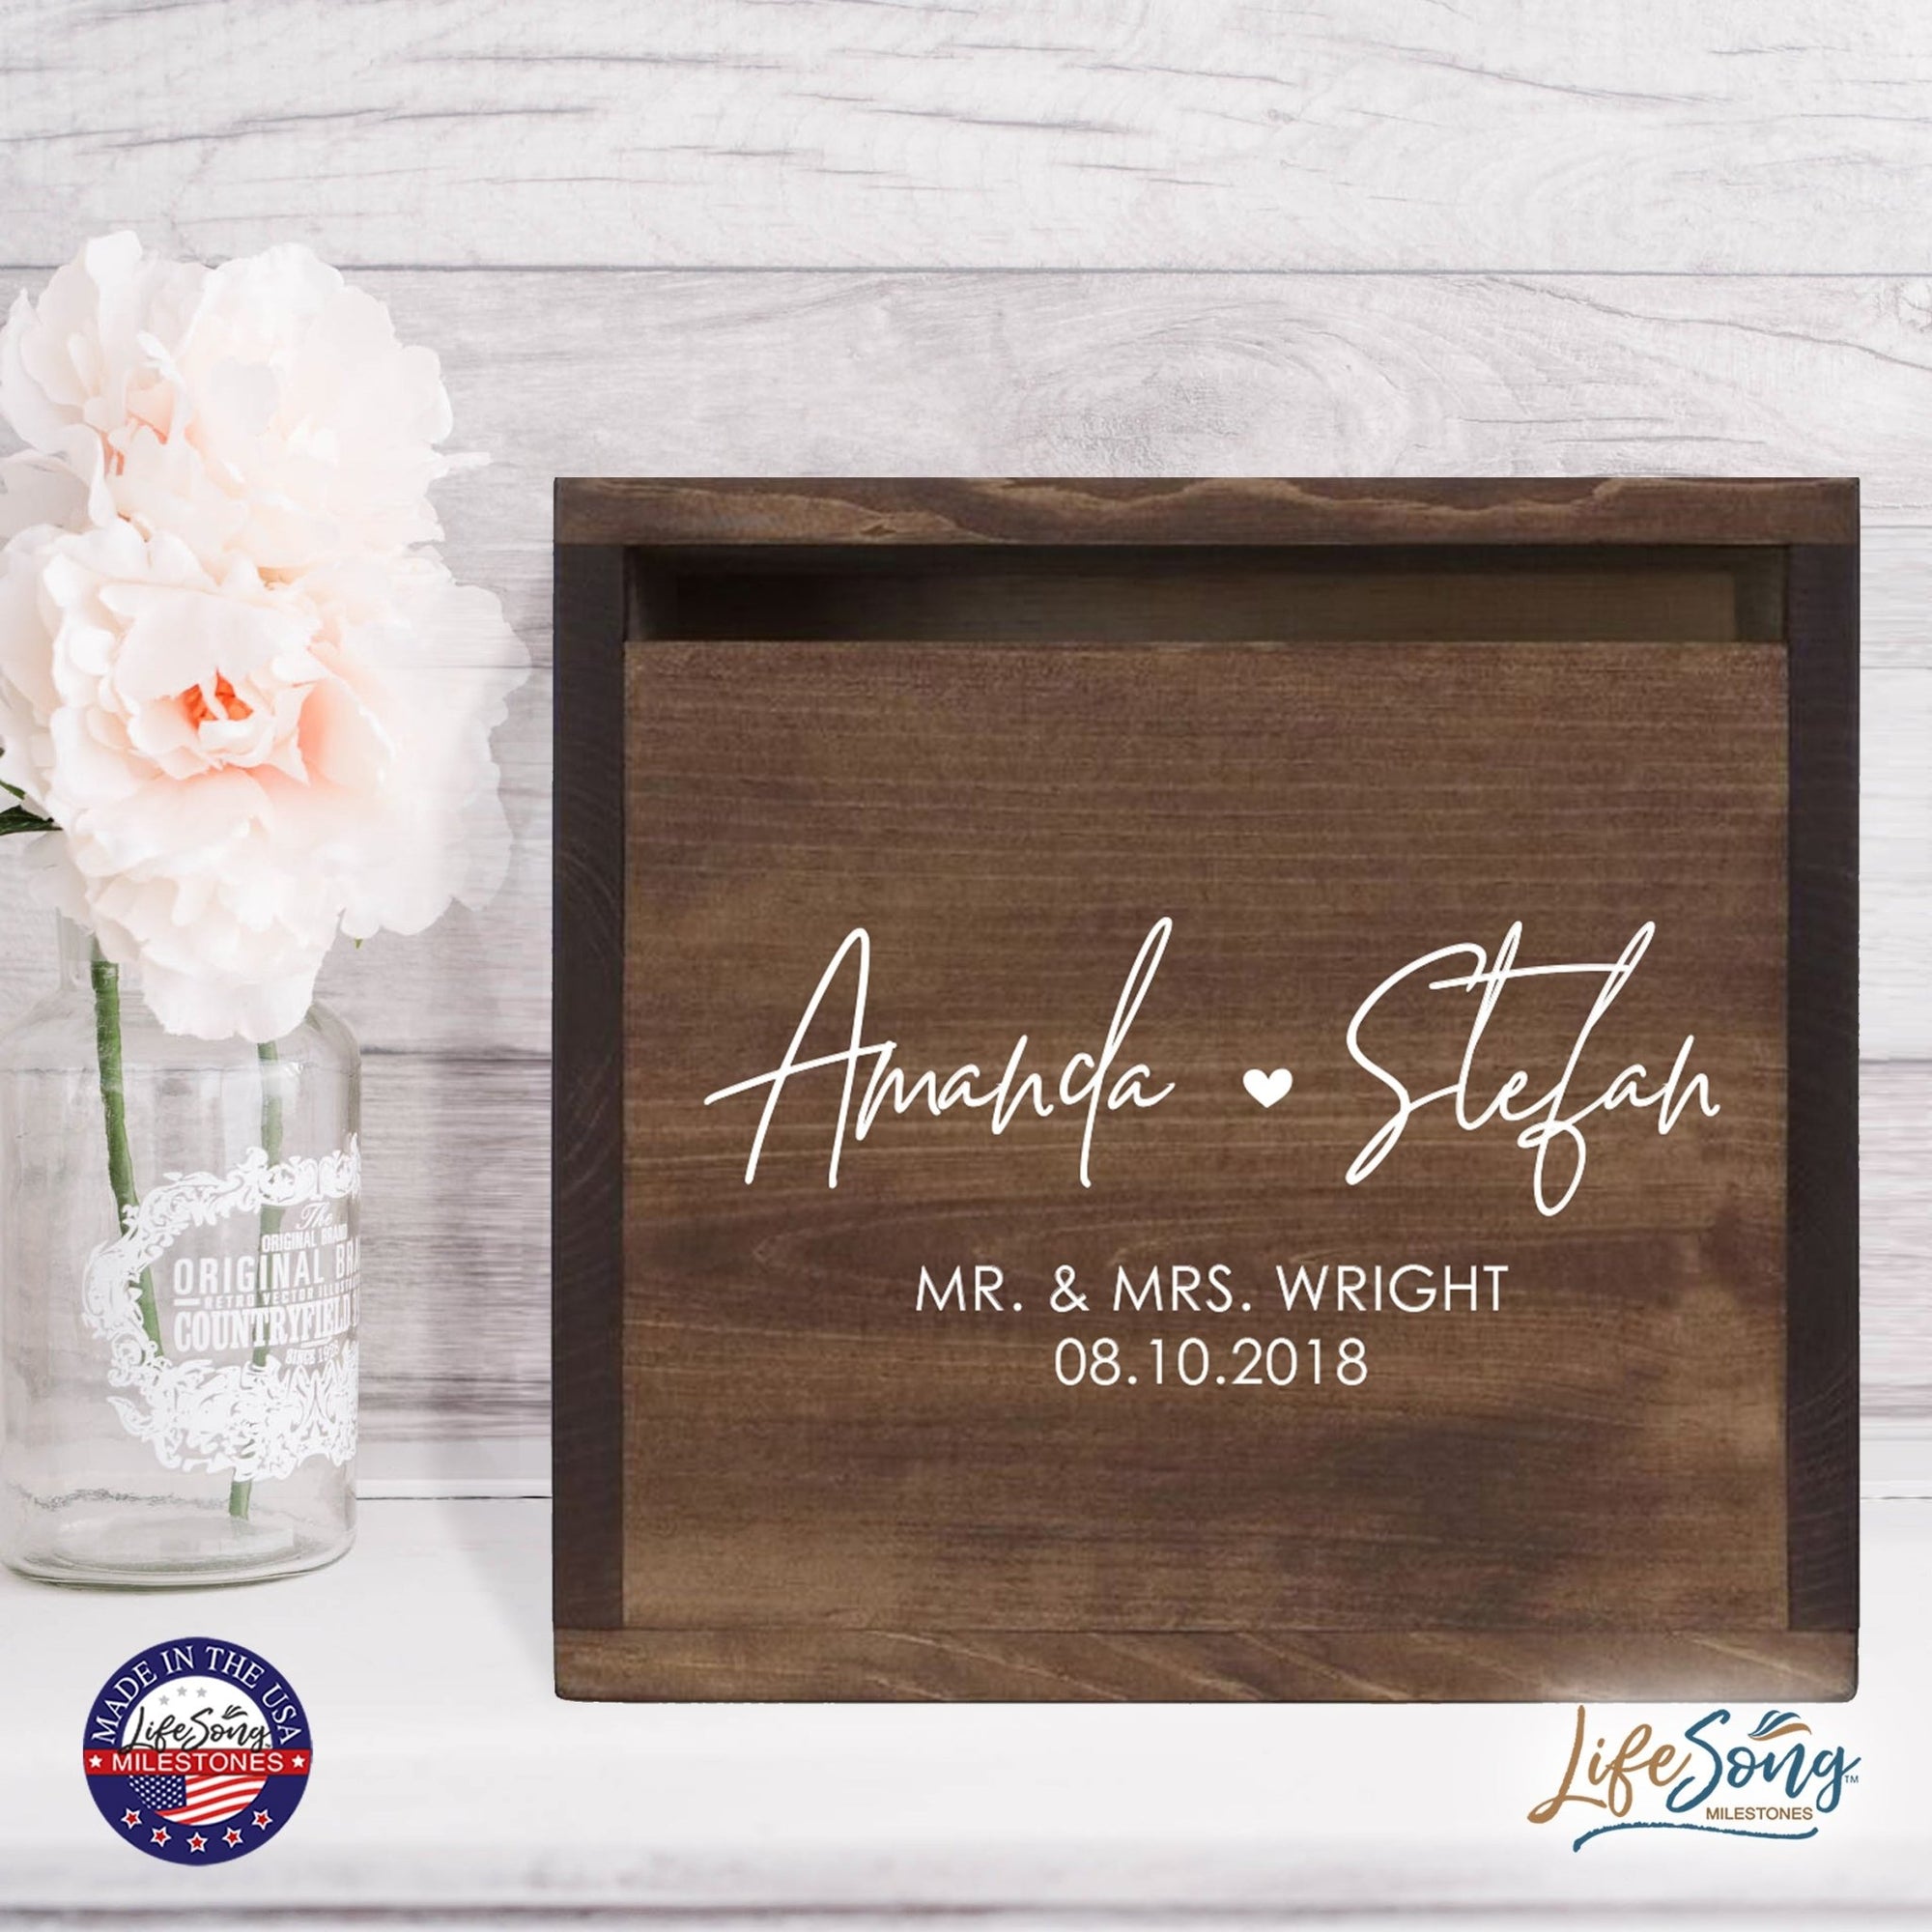 Personalized Wooden Card Box for Wedding Ceremonies, Venues, Receptions, Bridal Showers, and Engagement Parties 13.5x12 - Amanda & Stefan (Heart) - LifeSong Milestones